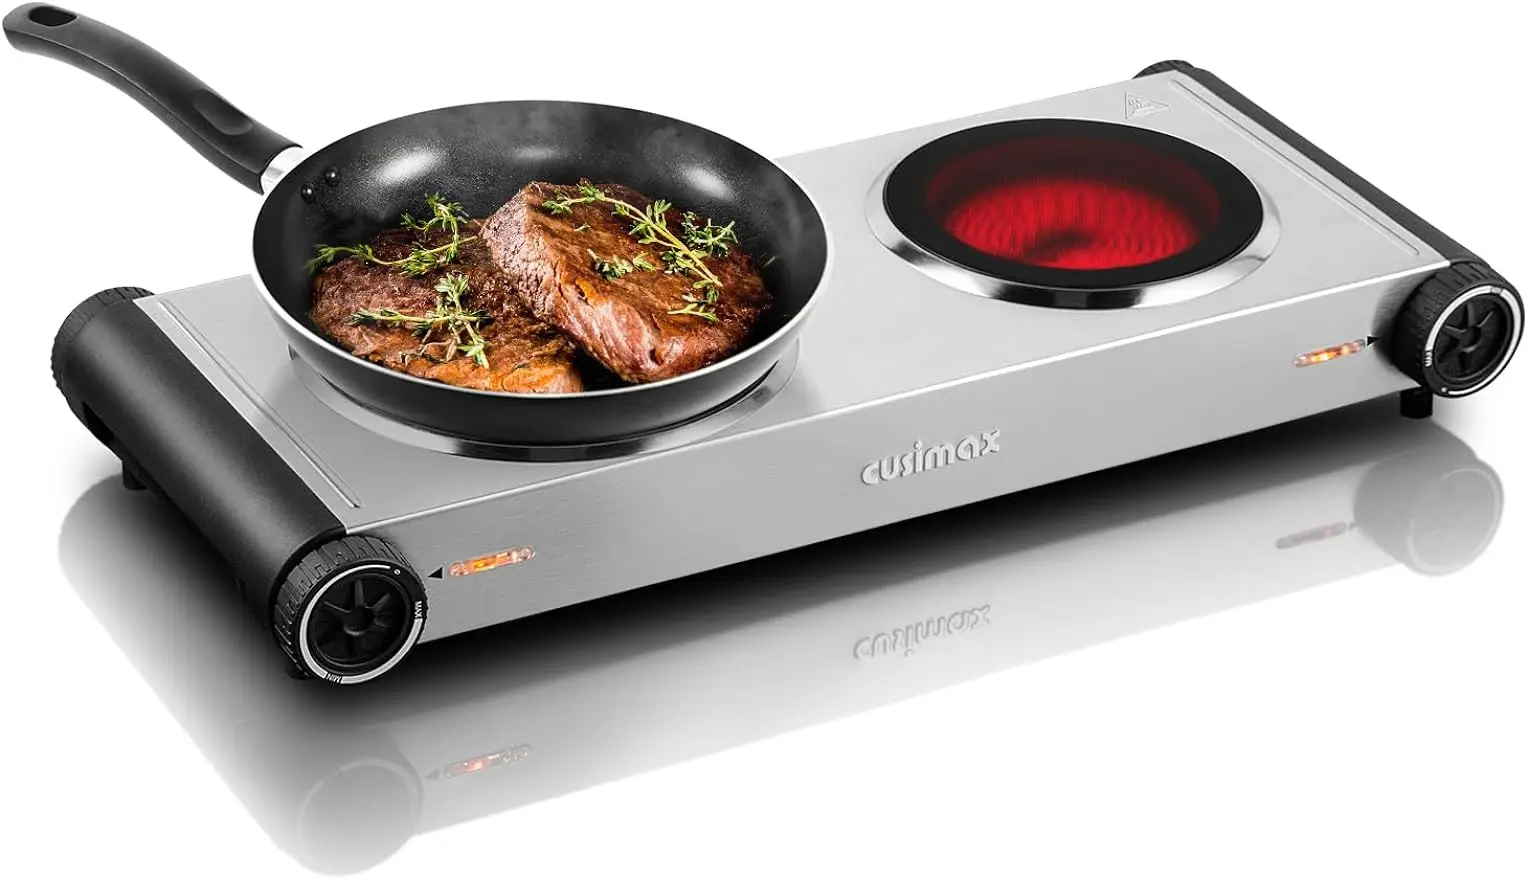 

CUSIMAX Dual Hot Plate,1800W Infrared Cooktop, Portable Electric Stove for Cooking,Ceramic Glass Heating Plate, Concealed Handle